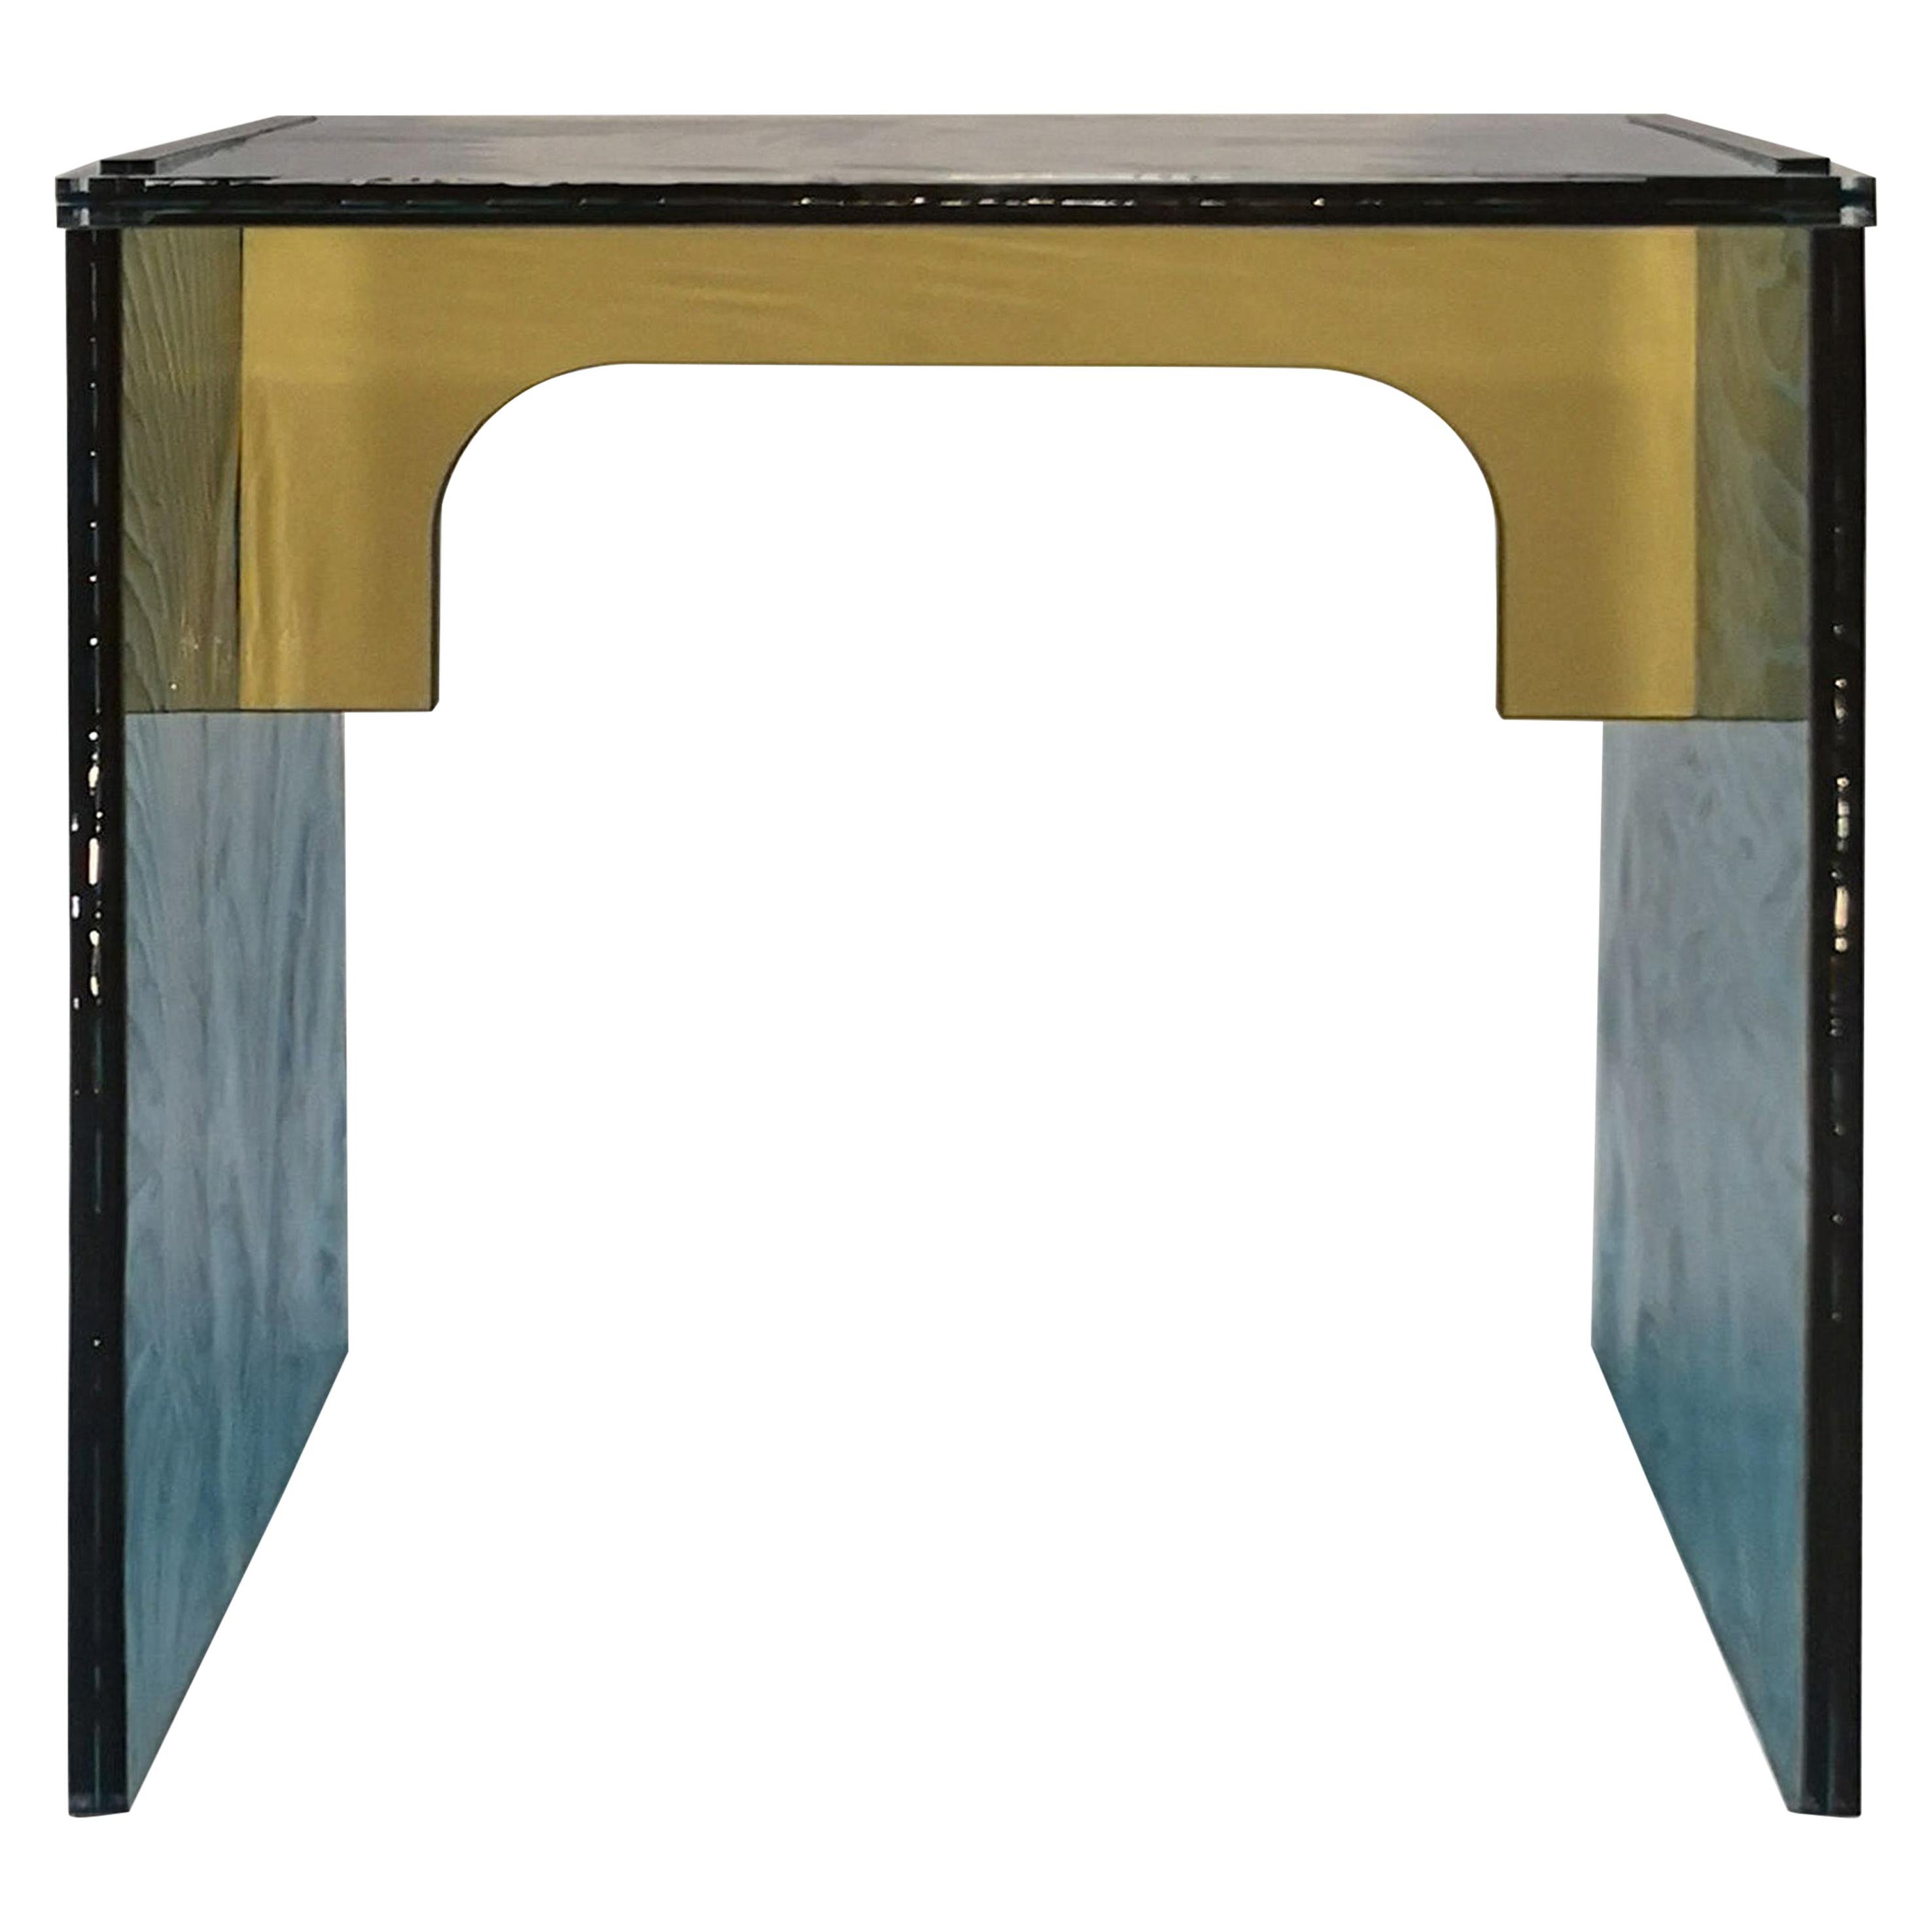 Sketch Quadro Side Table 1 Made of Green Acrylic Des, Roberto Giacomucci in 2020